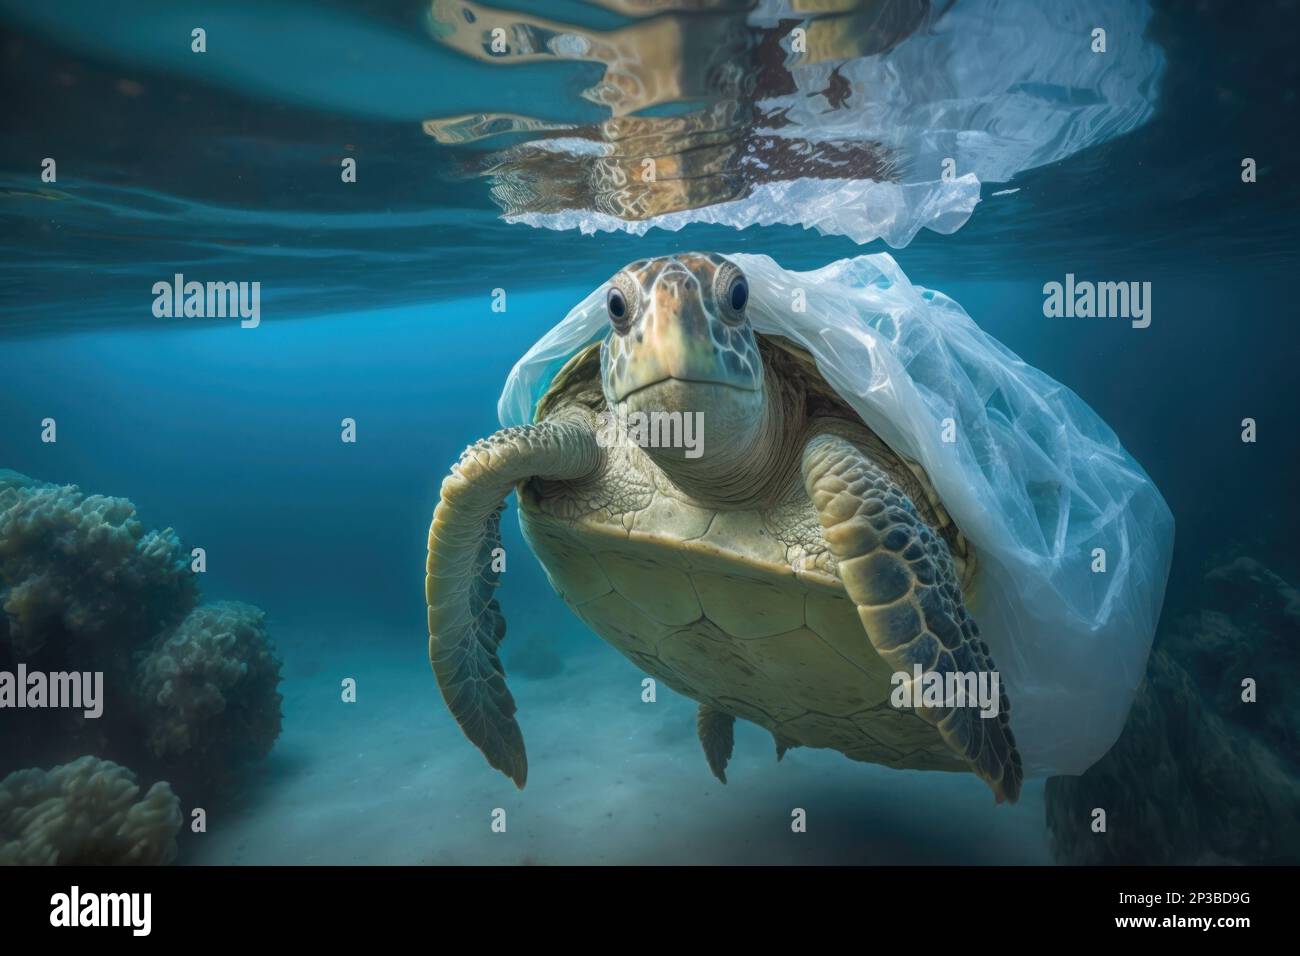 https://c8.alamy.com/comp/2P3BD9G/turtle-swimming-with-a-plastic-bag-stuck-on-it-metaphor-on-the-danger-of-plastic-waste-in-the-seas-plastic-pollution-in-ocean-environmental-problem-2P3BD9G.jpg